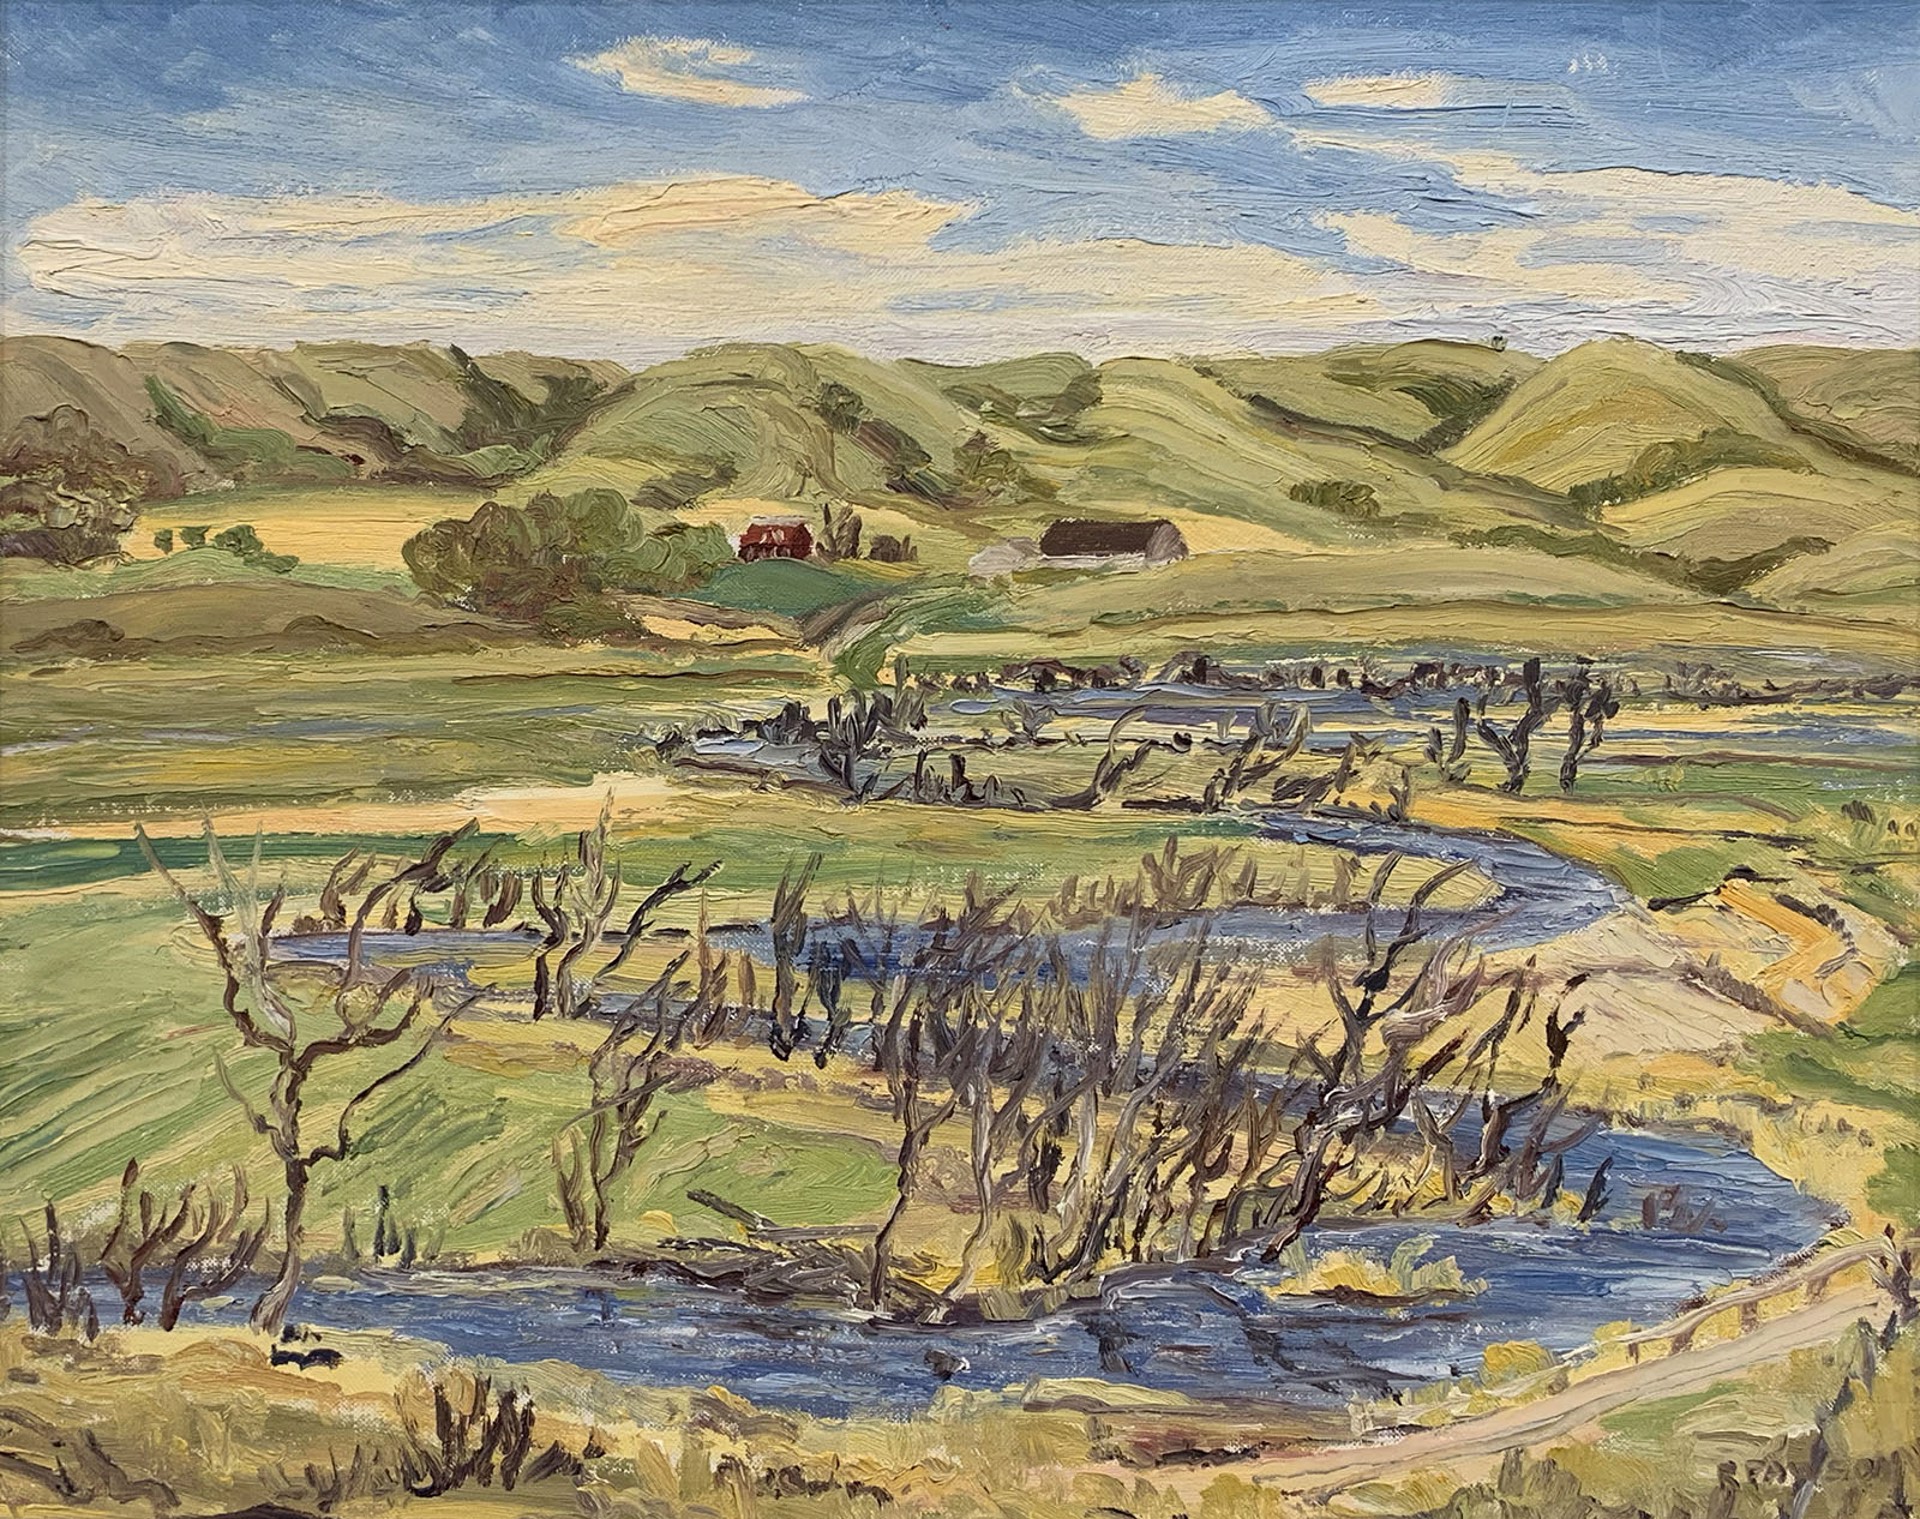 Early Summer in the Valley by Ruth Pawson (1908-1994)